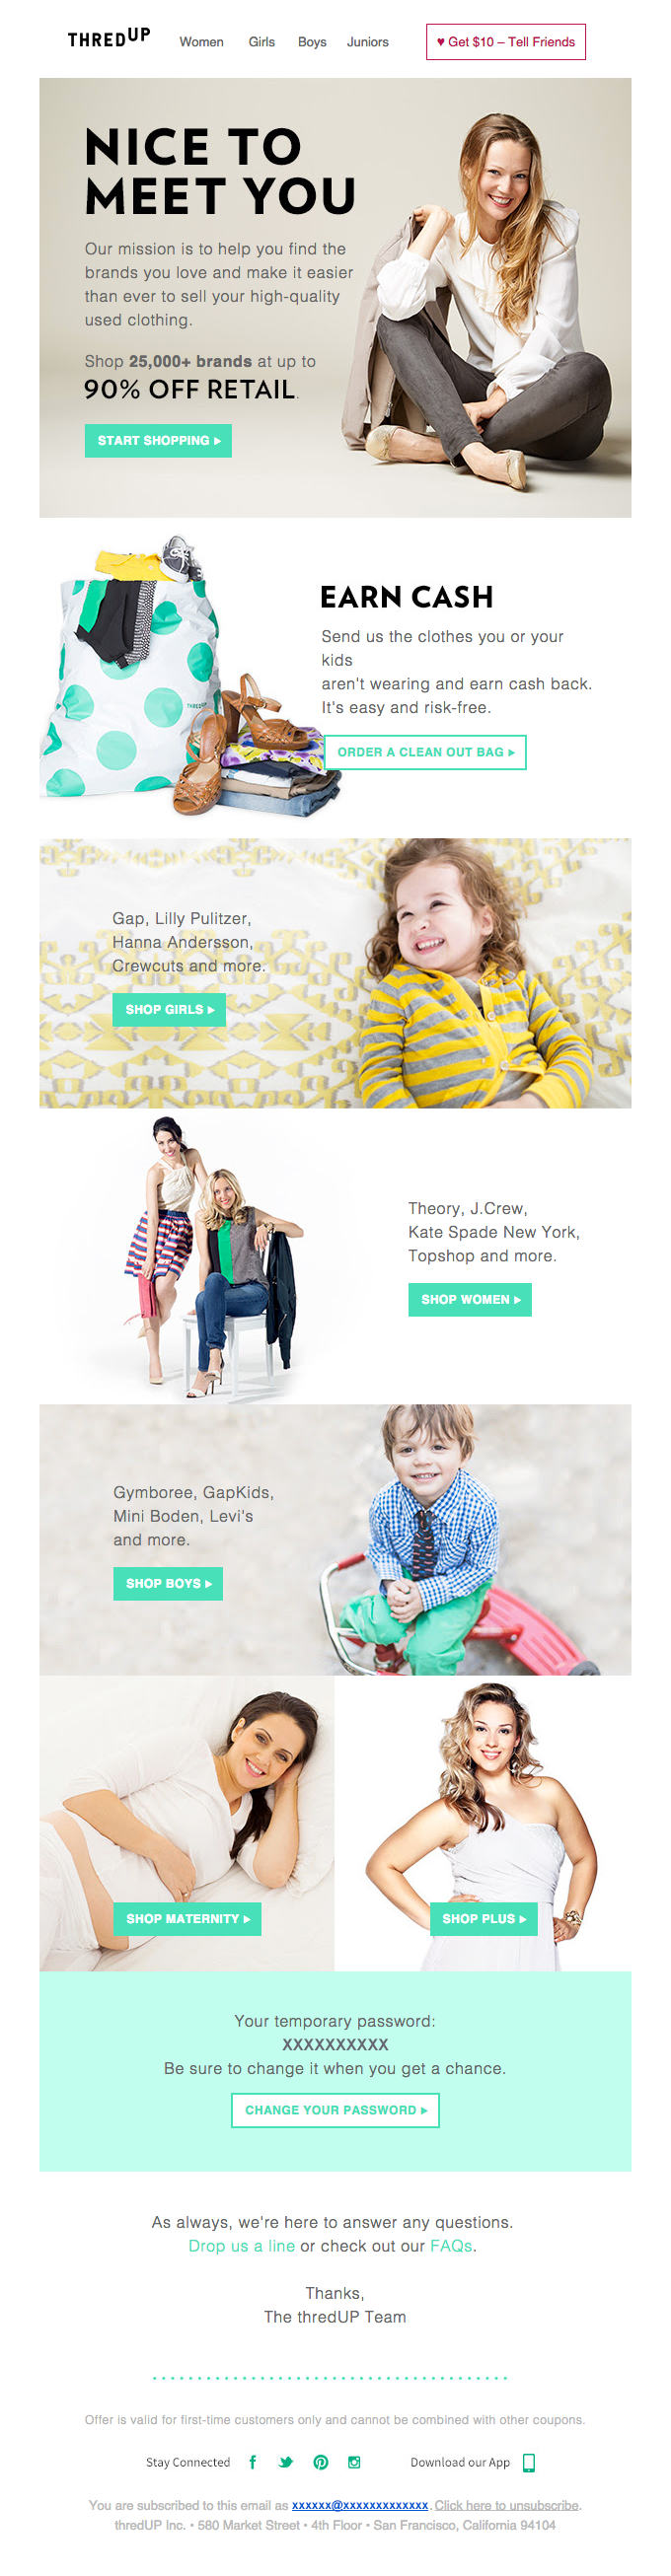 new-signup-onboarding-ecommerce-email-with-discount-from-thredup